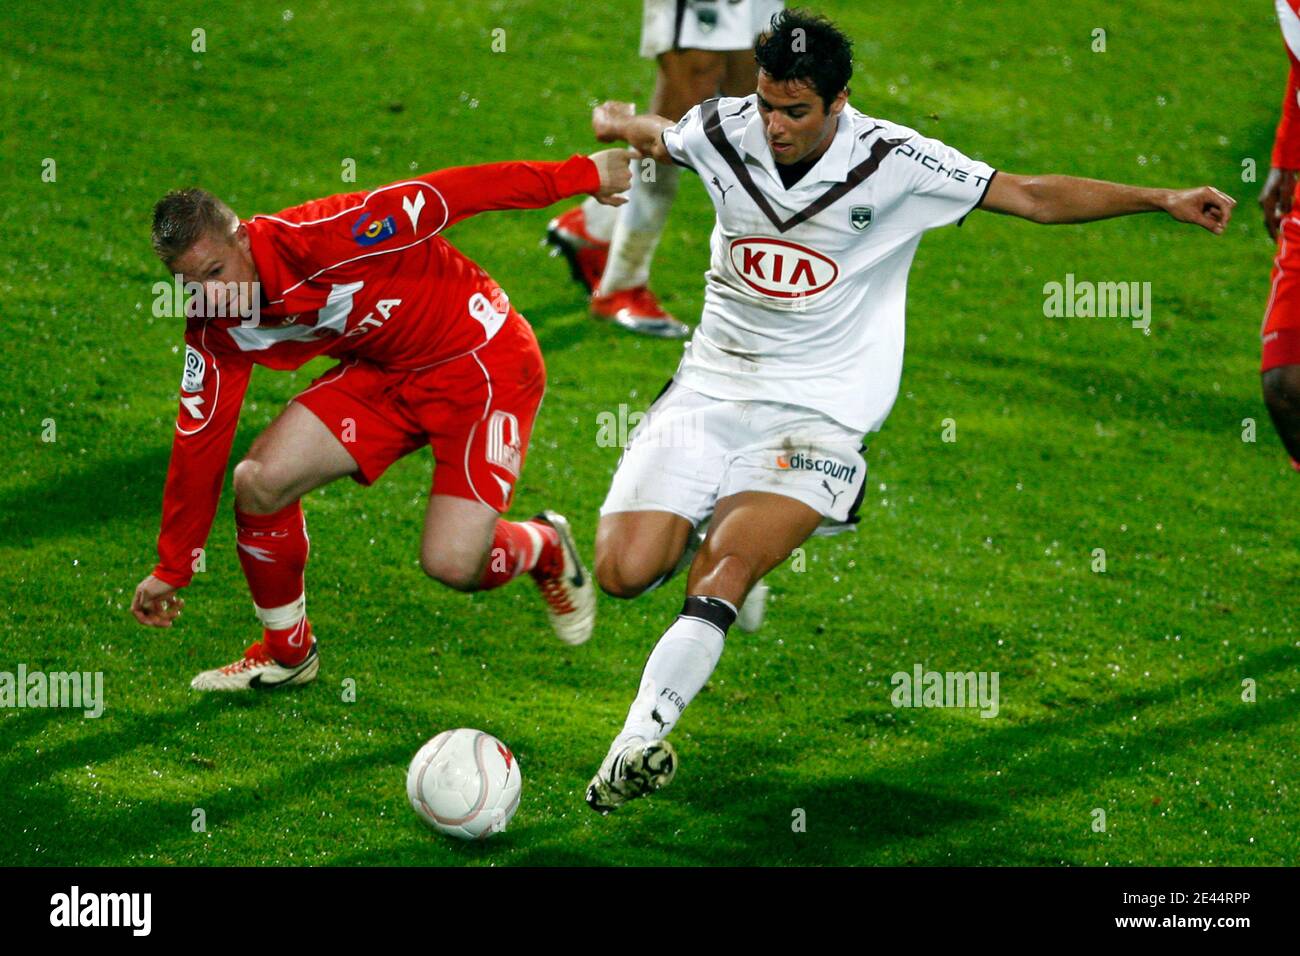 Valenciennes' Rudy Mater fights for the ball with Bordeaux's Yoann Gourcuff  during the French First League soccer match between Valenciennes Football  Club (VAFC) and Football Club Girondins de Bordeaux (FCGB) at Nungesser